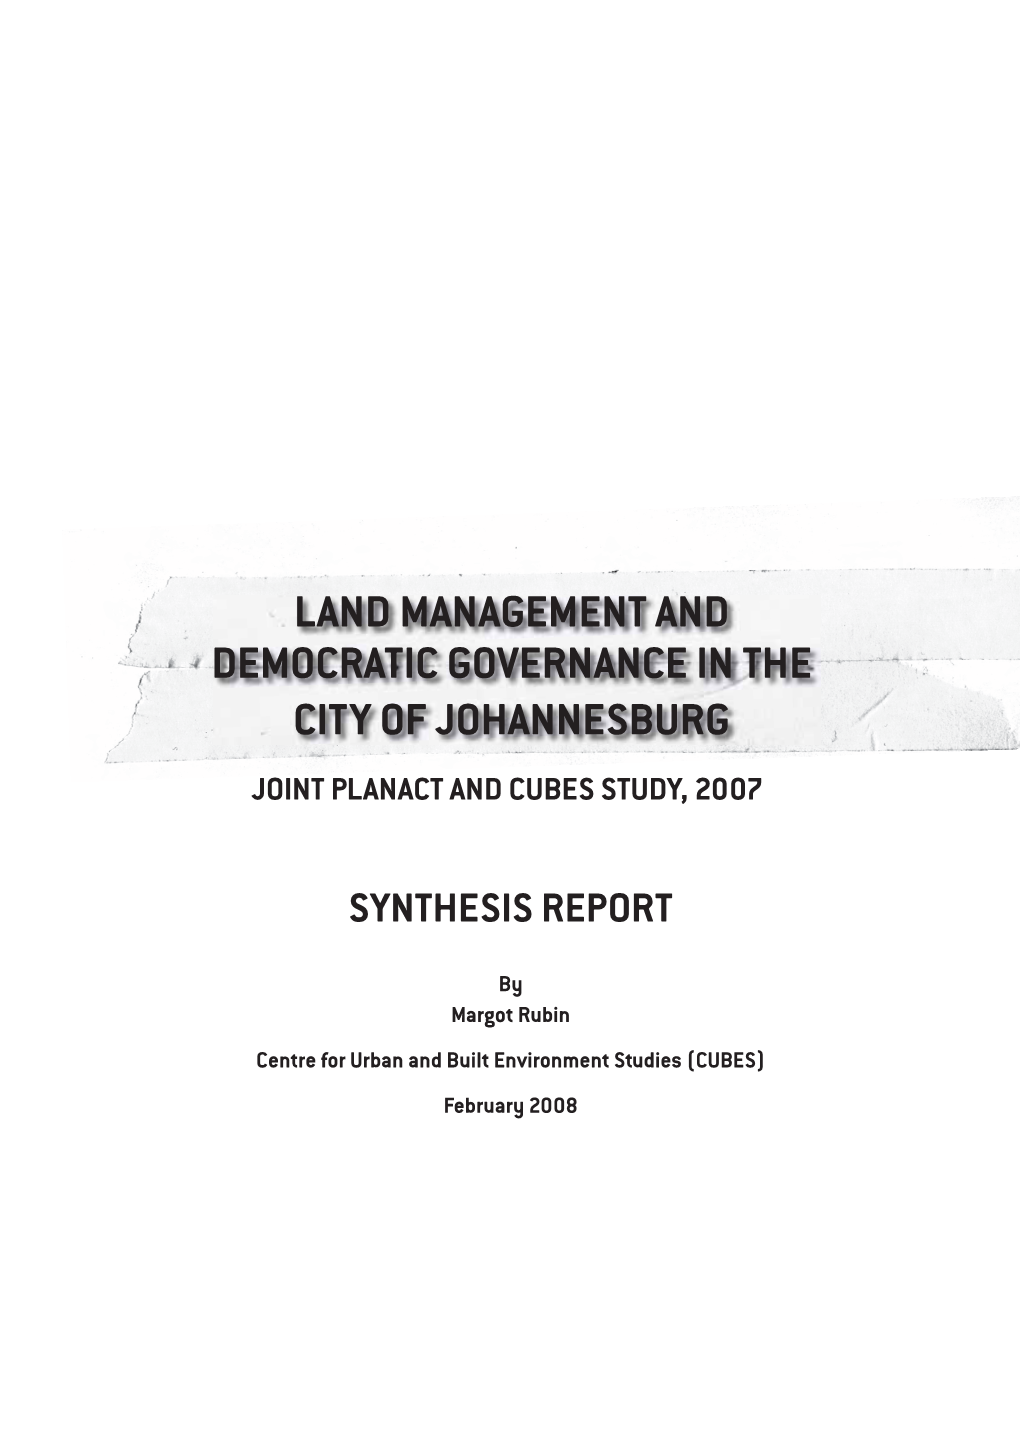 Land Management and Democratic Governance in the City of Johannesburg Joint Planact and Cubes Study, 2007